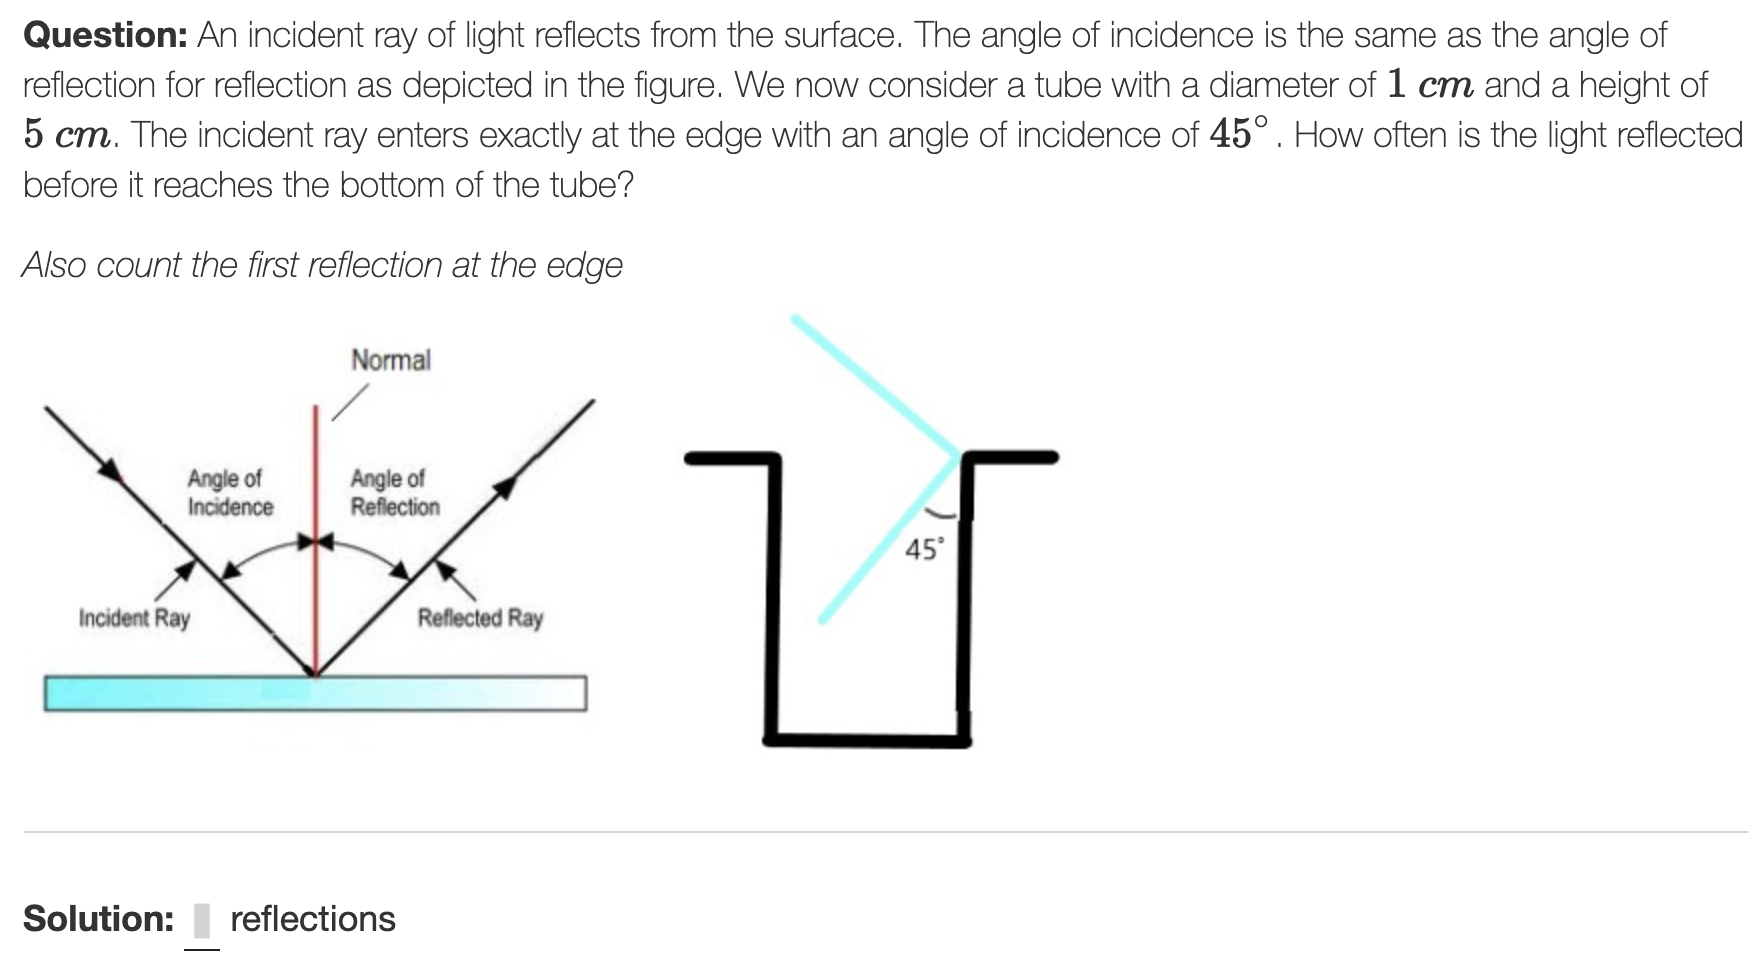 Question: An incident ray of light reflects from the surface. The angle of incidence is the same as the angle of
reflection for reflection as depicted in the figure. We now consider a tube with a diameter of 1 cm and a height of
5 cm. The incident ray enters exactly at the edge with an angle of incidence of 45°. How often is the light reflected
before it reaches the bottom of the tube?
Also count the first reflection at the edge
Normal
Angle of
Incidence
Angle of
Reflection
45
Incident Ray
Reflected Ray
Solution:
reflections
